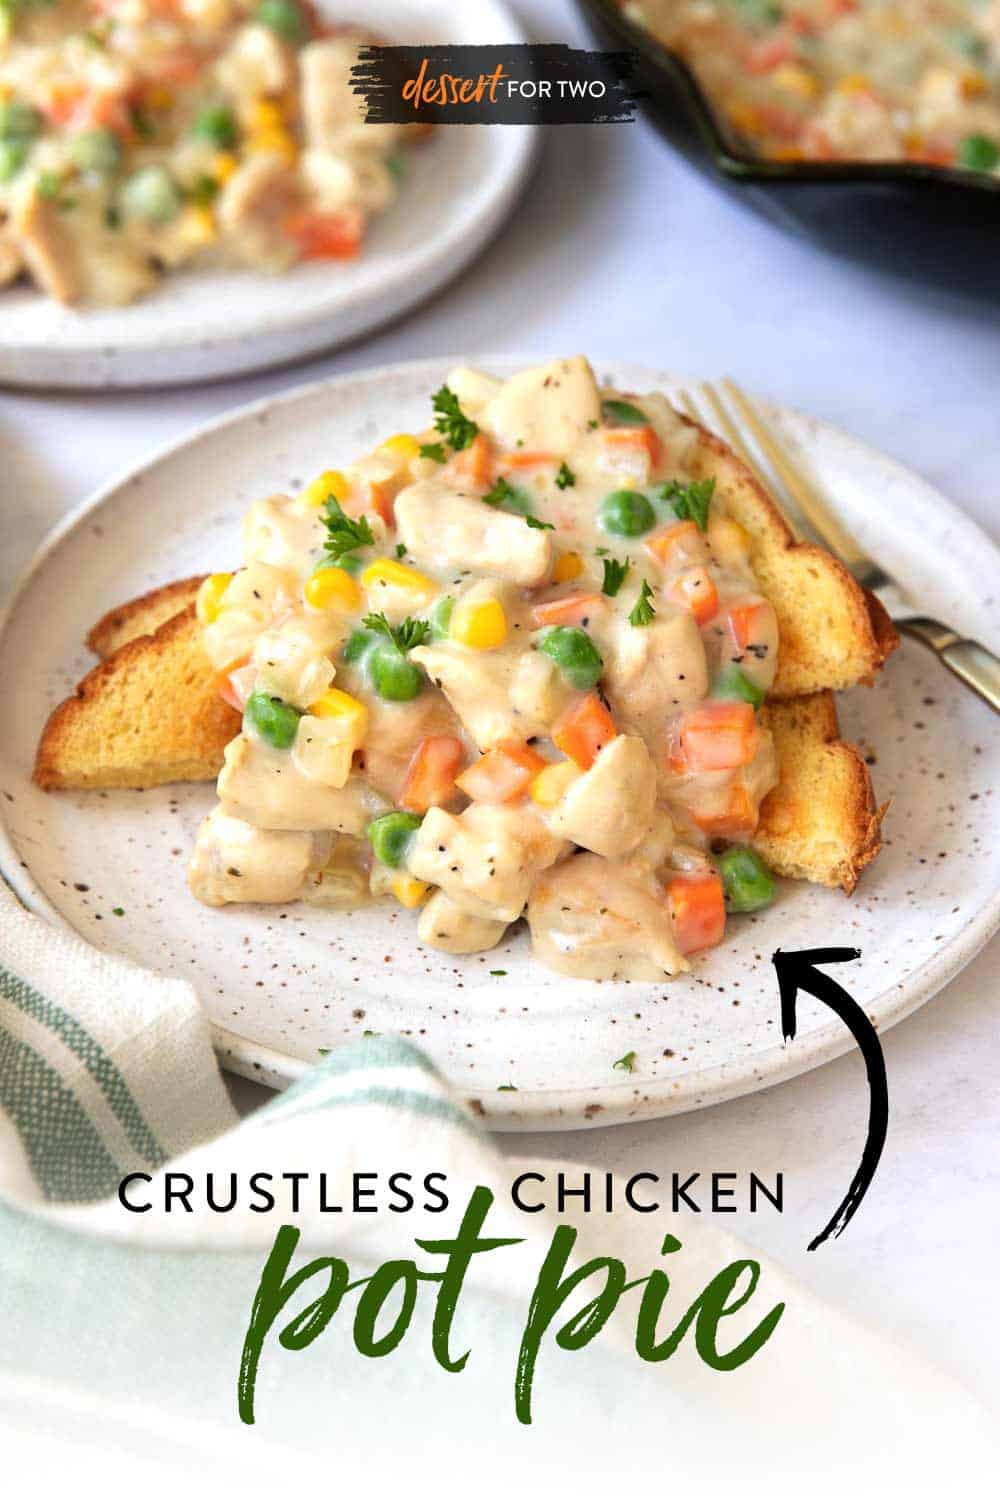 Lazy girl chicken pot pie for two. Serve creamy chicken pot pie over toast and don't mess with a crust! #easyrecipe #chickenrecipe #chickenpotpie #lazyrecipe #toast